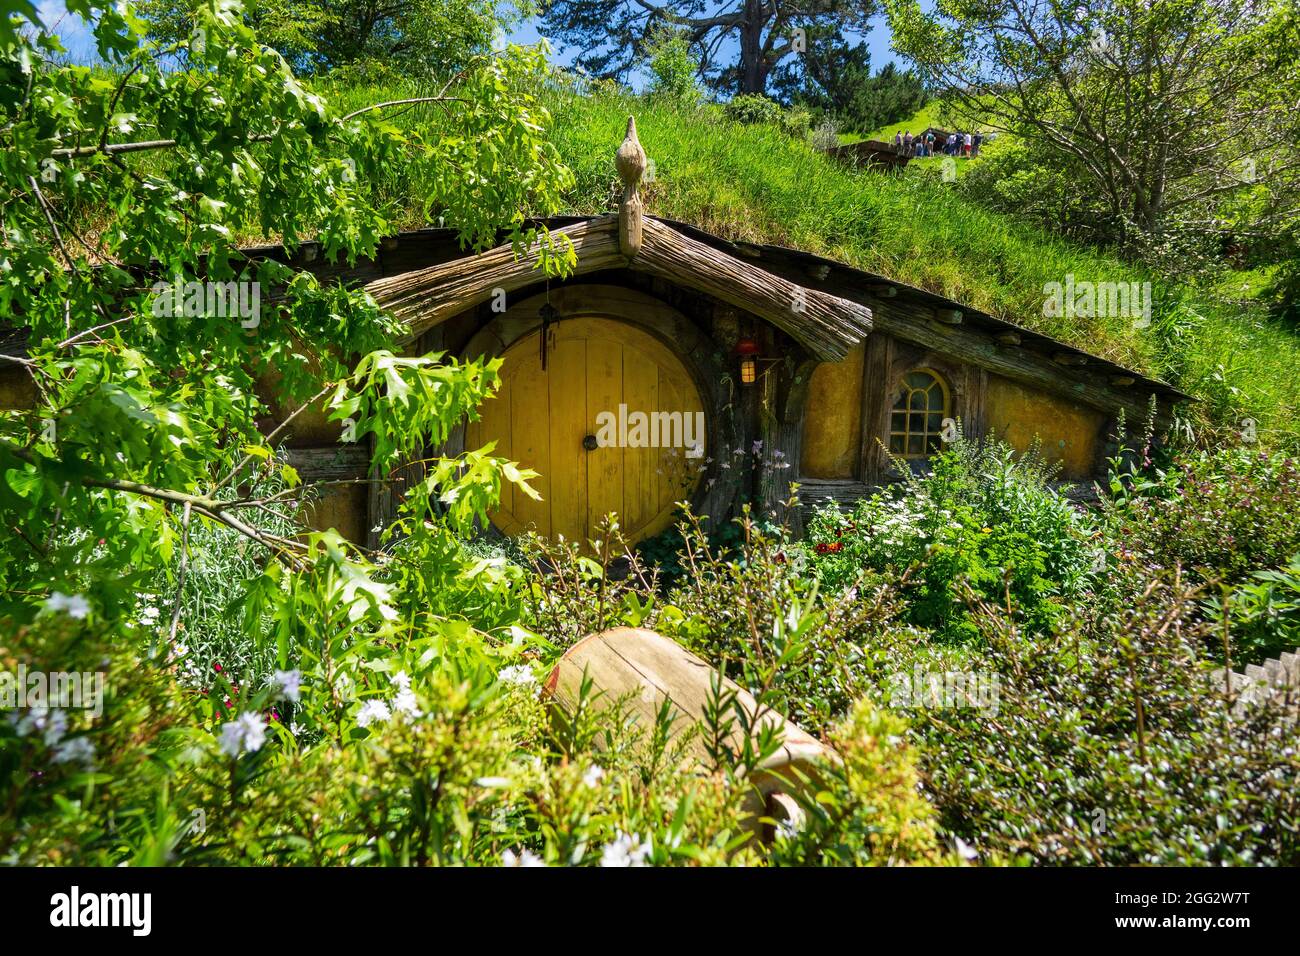 Samweis Gamgee's Hobbit Hole Home On The Hobbiton Movie Set For The Lord Of The Rings Movie Trilogy In Matamata New Zealand Stock Photo